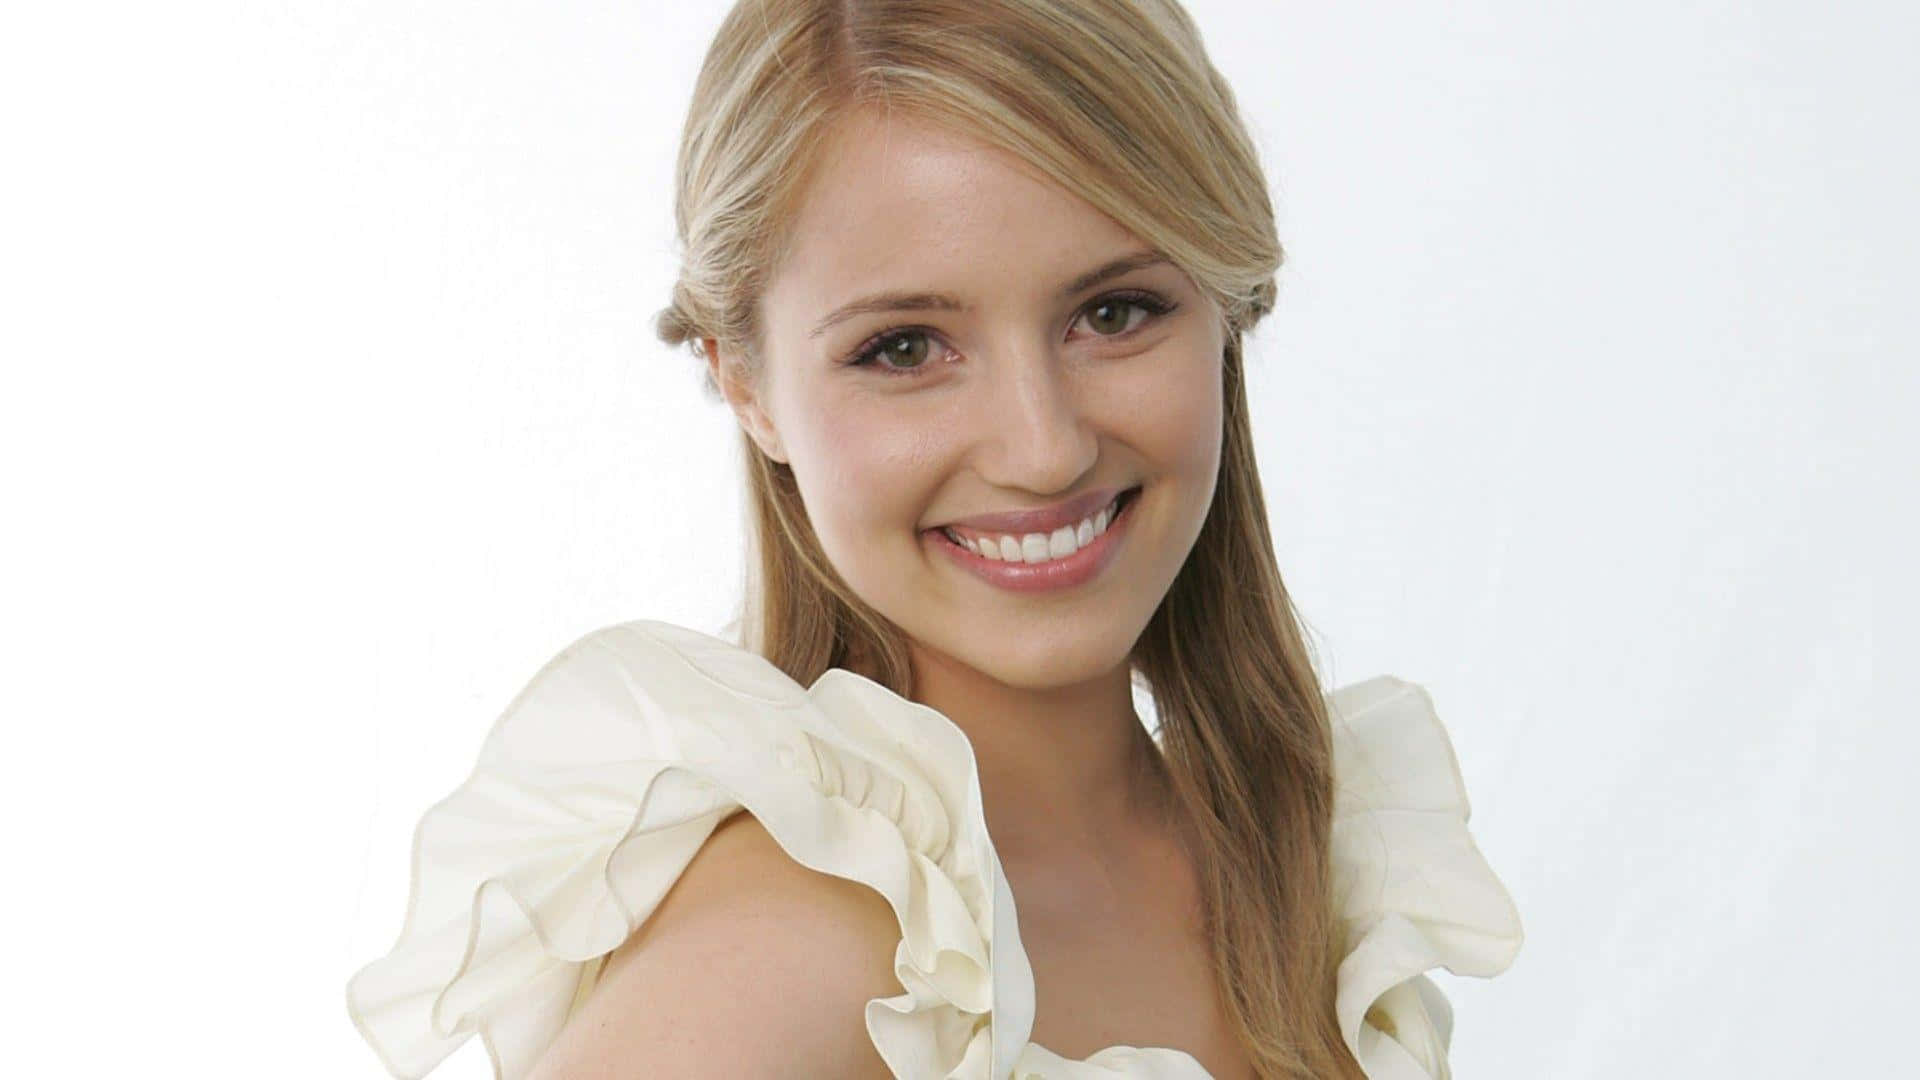 Dianna Agron Posing Elegantly in a Photographic Portrait Wallpaper